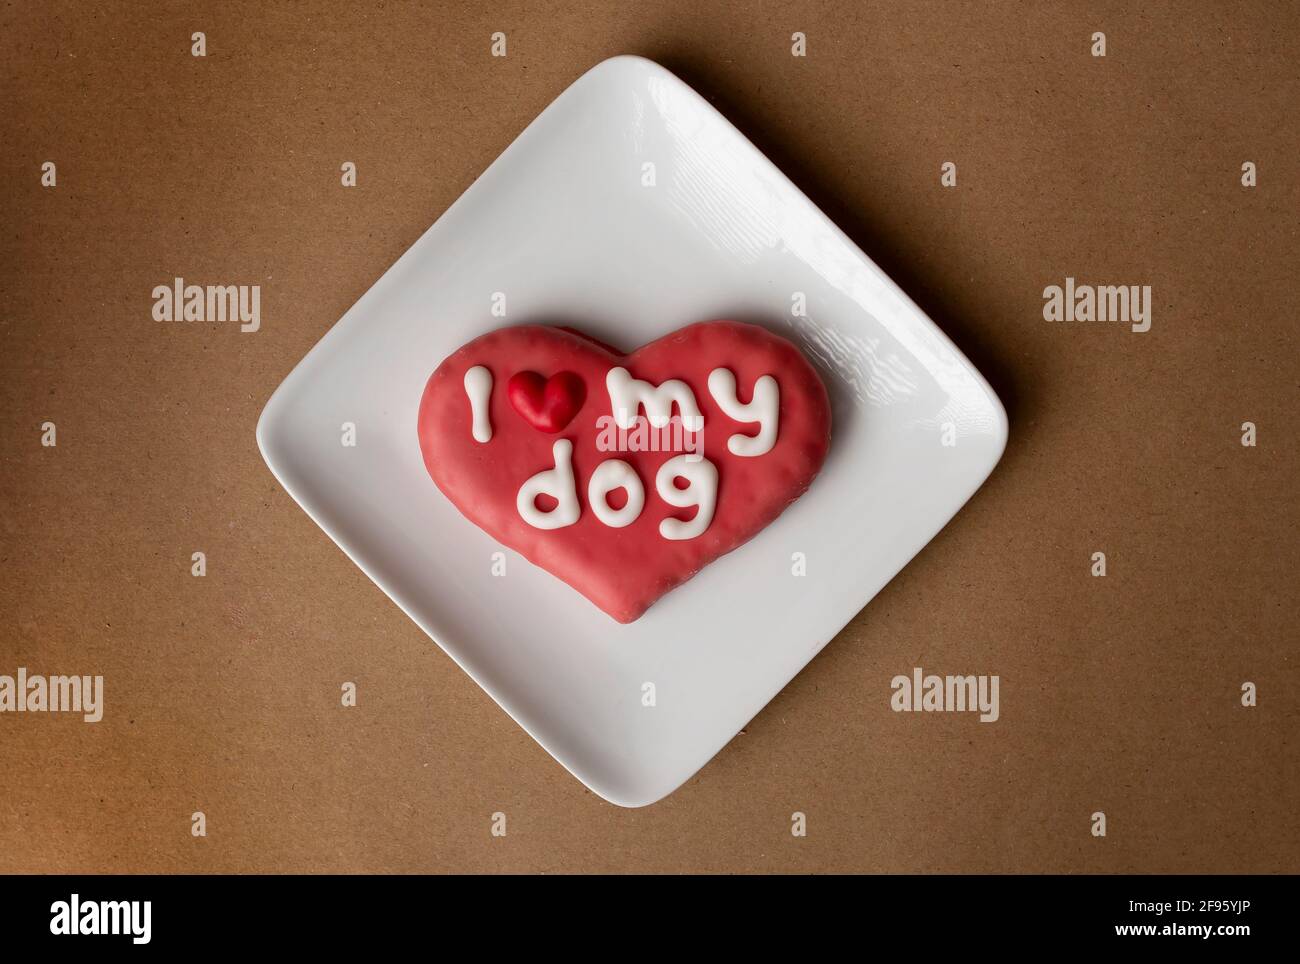 I Love My Dog biscuit on plate, clean background Stock Photo